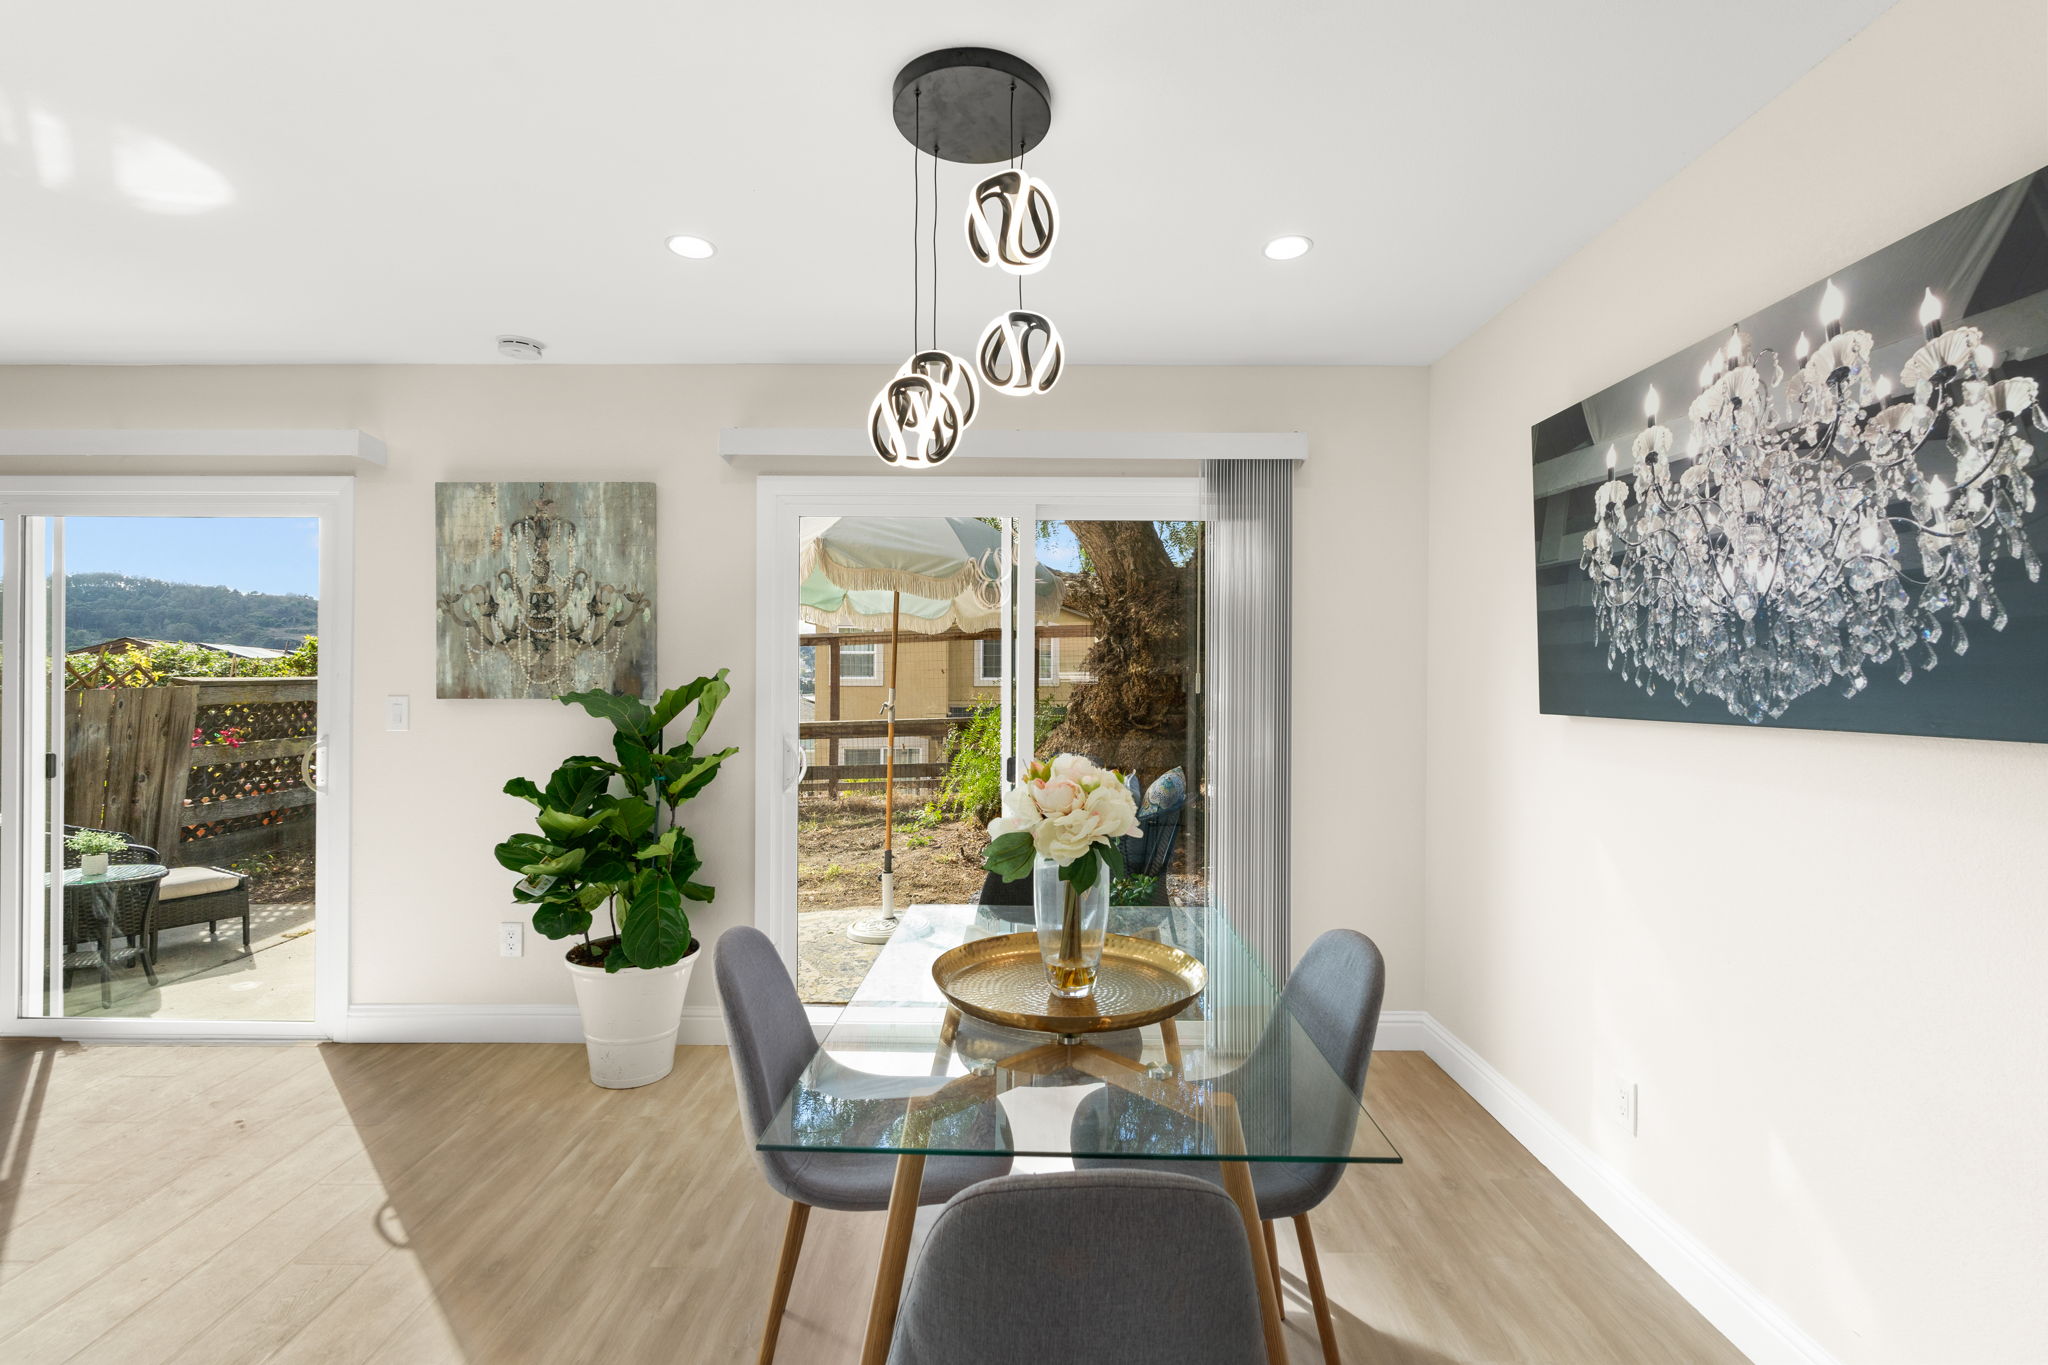 Welcome Home! Dining Area has abundant natural light